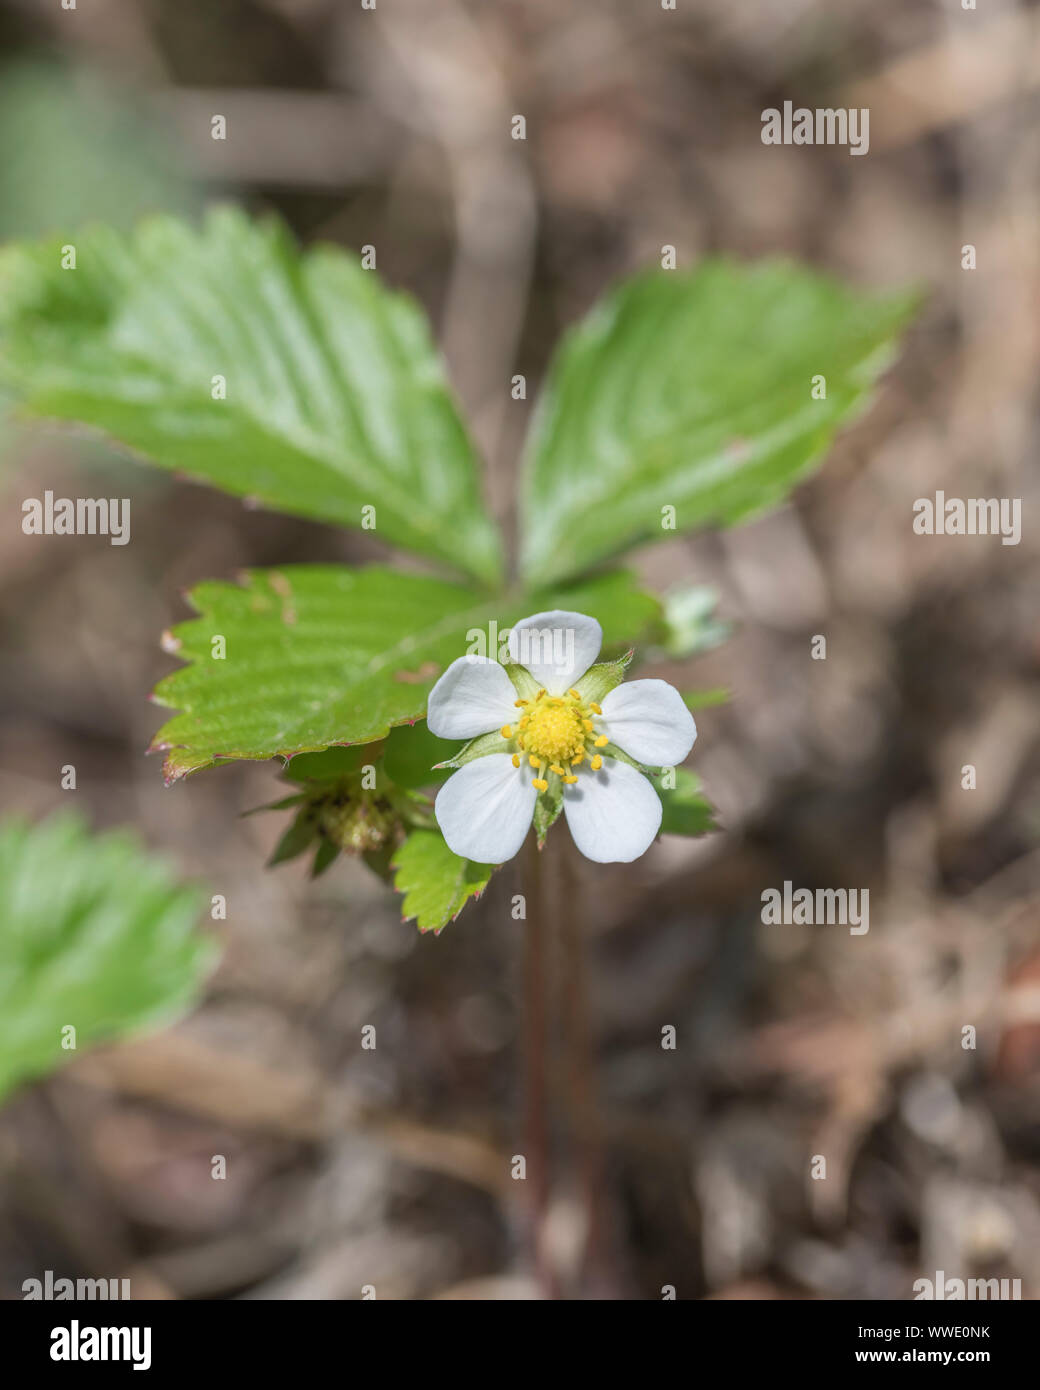 Macro close-up of Wild Strawberry / Fragaria vesca flower - small fruit is a real hedgerow / countryside treat for wild food foragers. Stock Photo